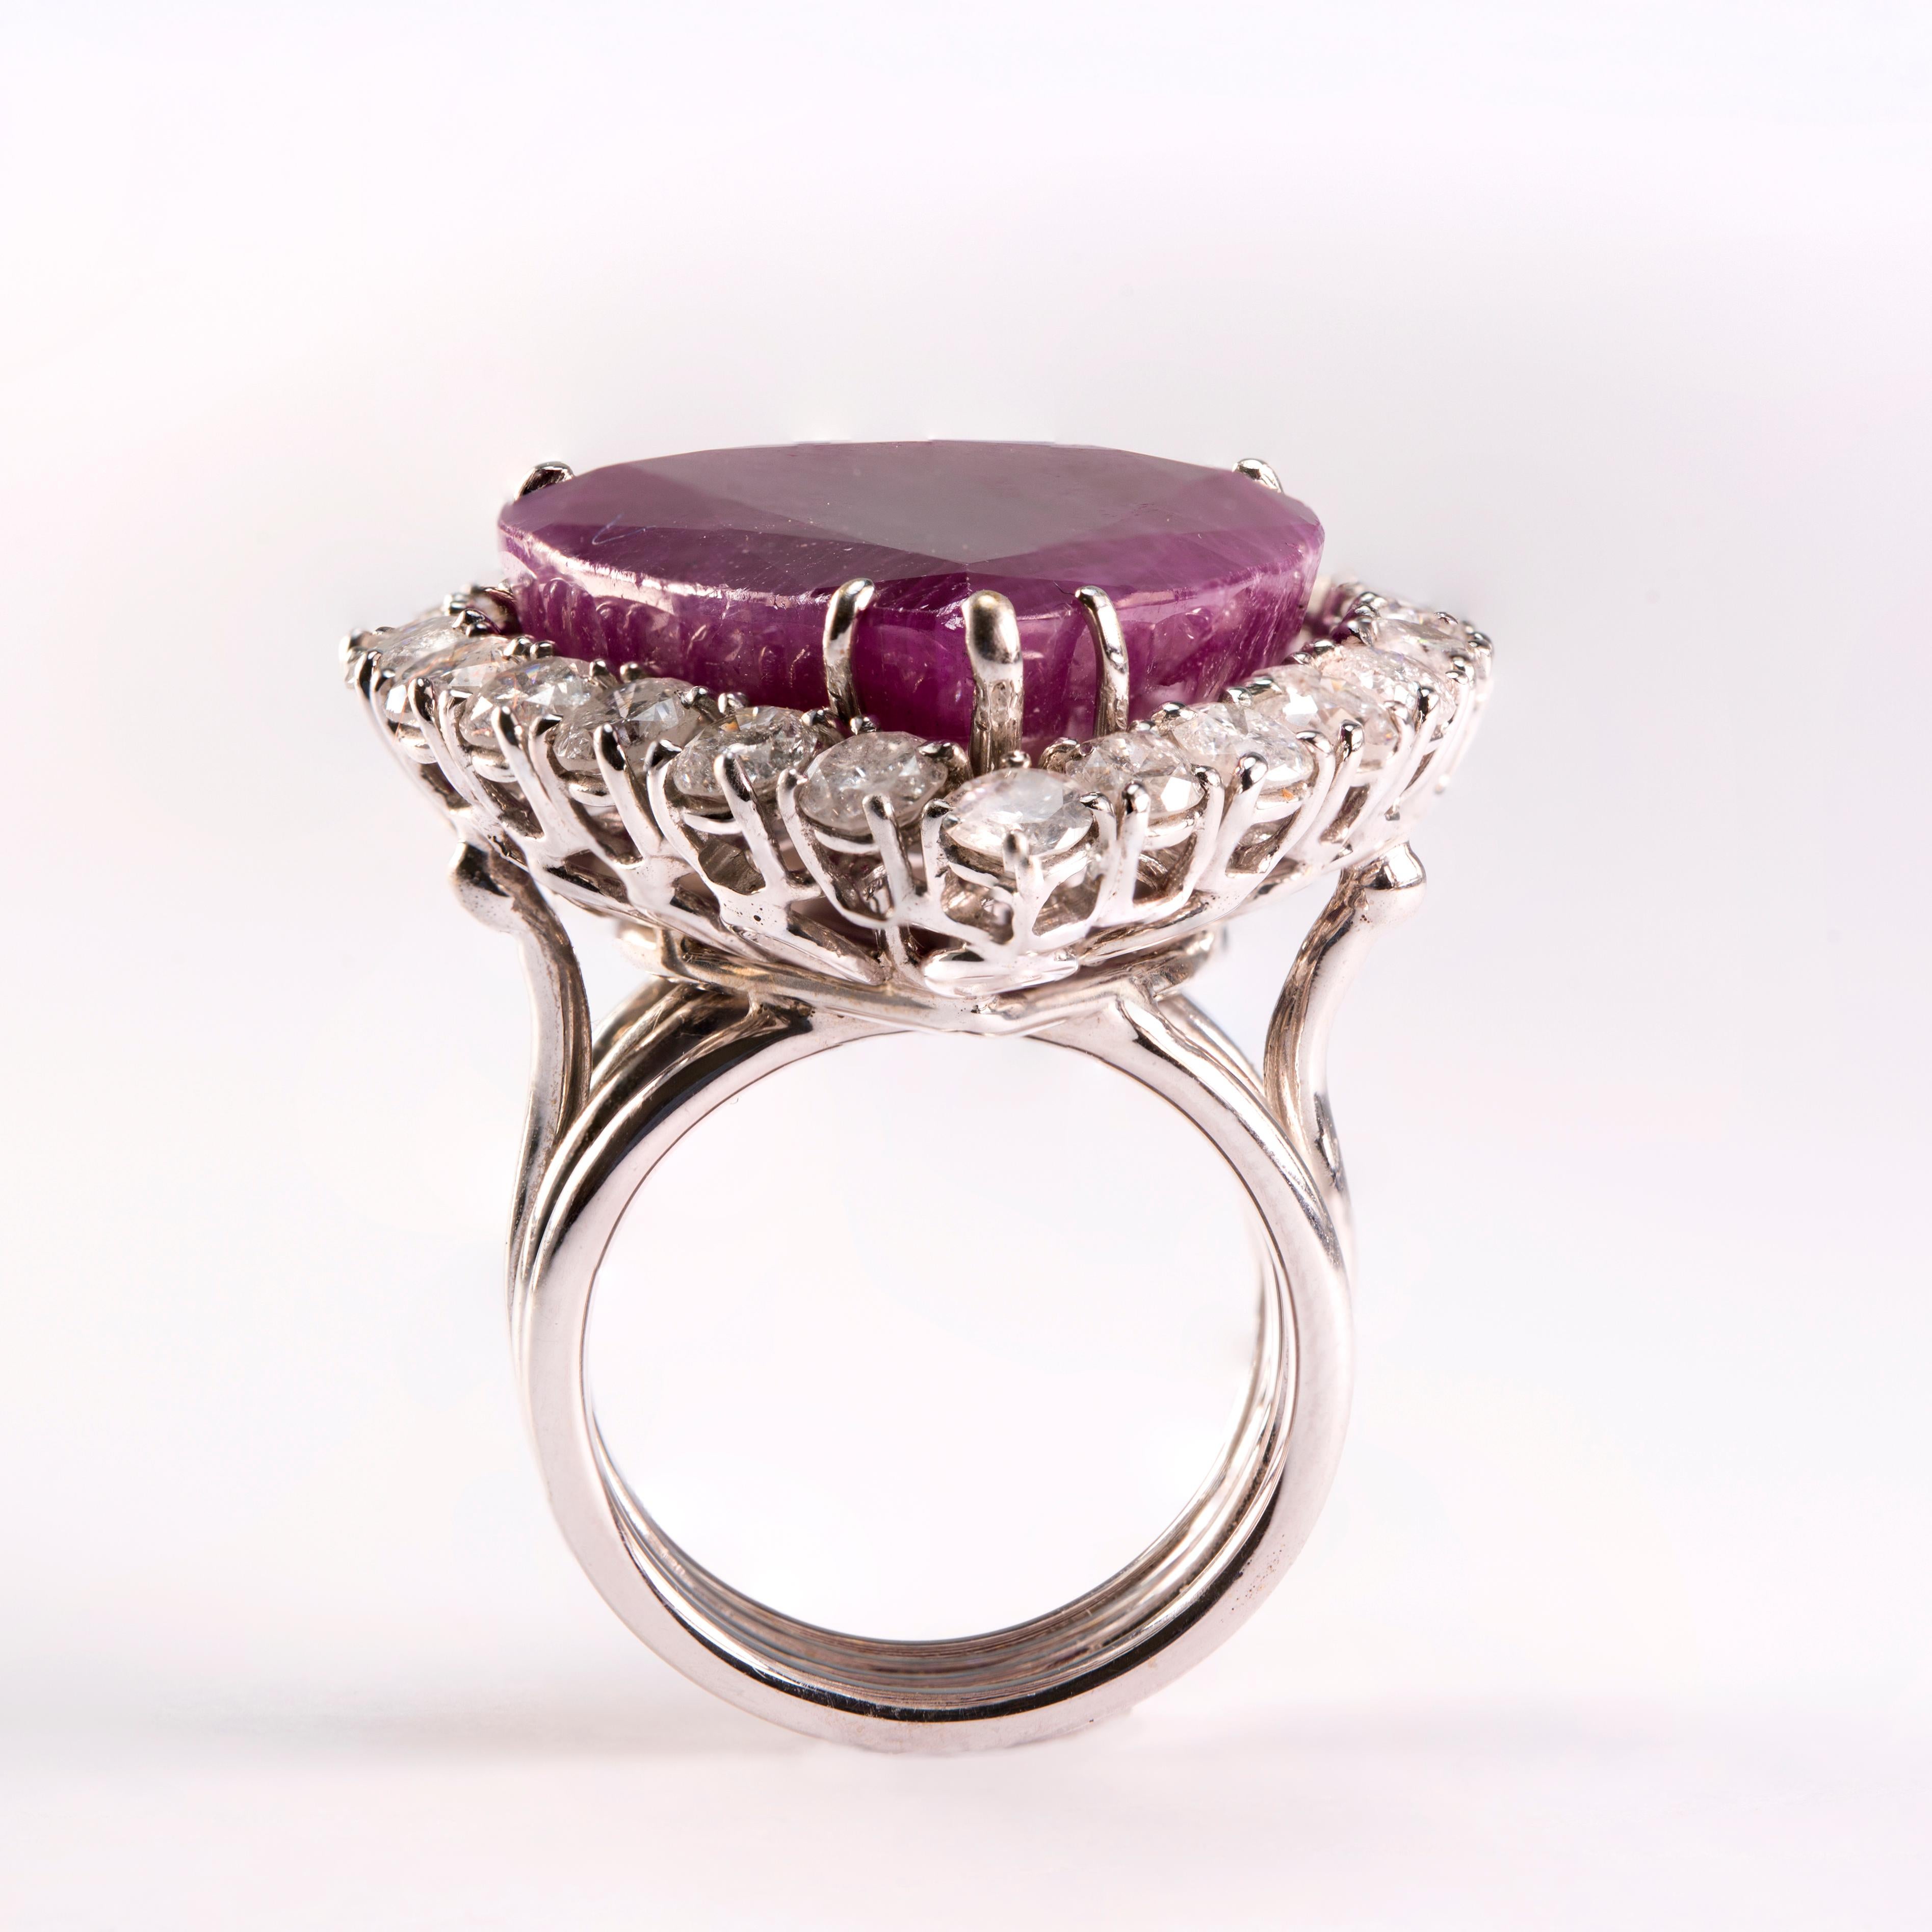 Contemporary 39.82 Carat African Ruby Icy Diamond Cocktail Ring For Sale